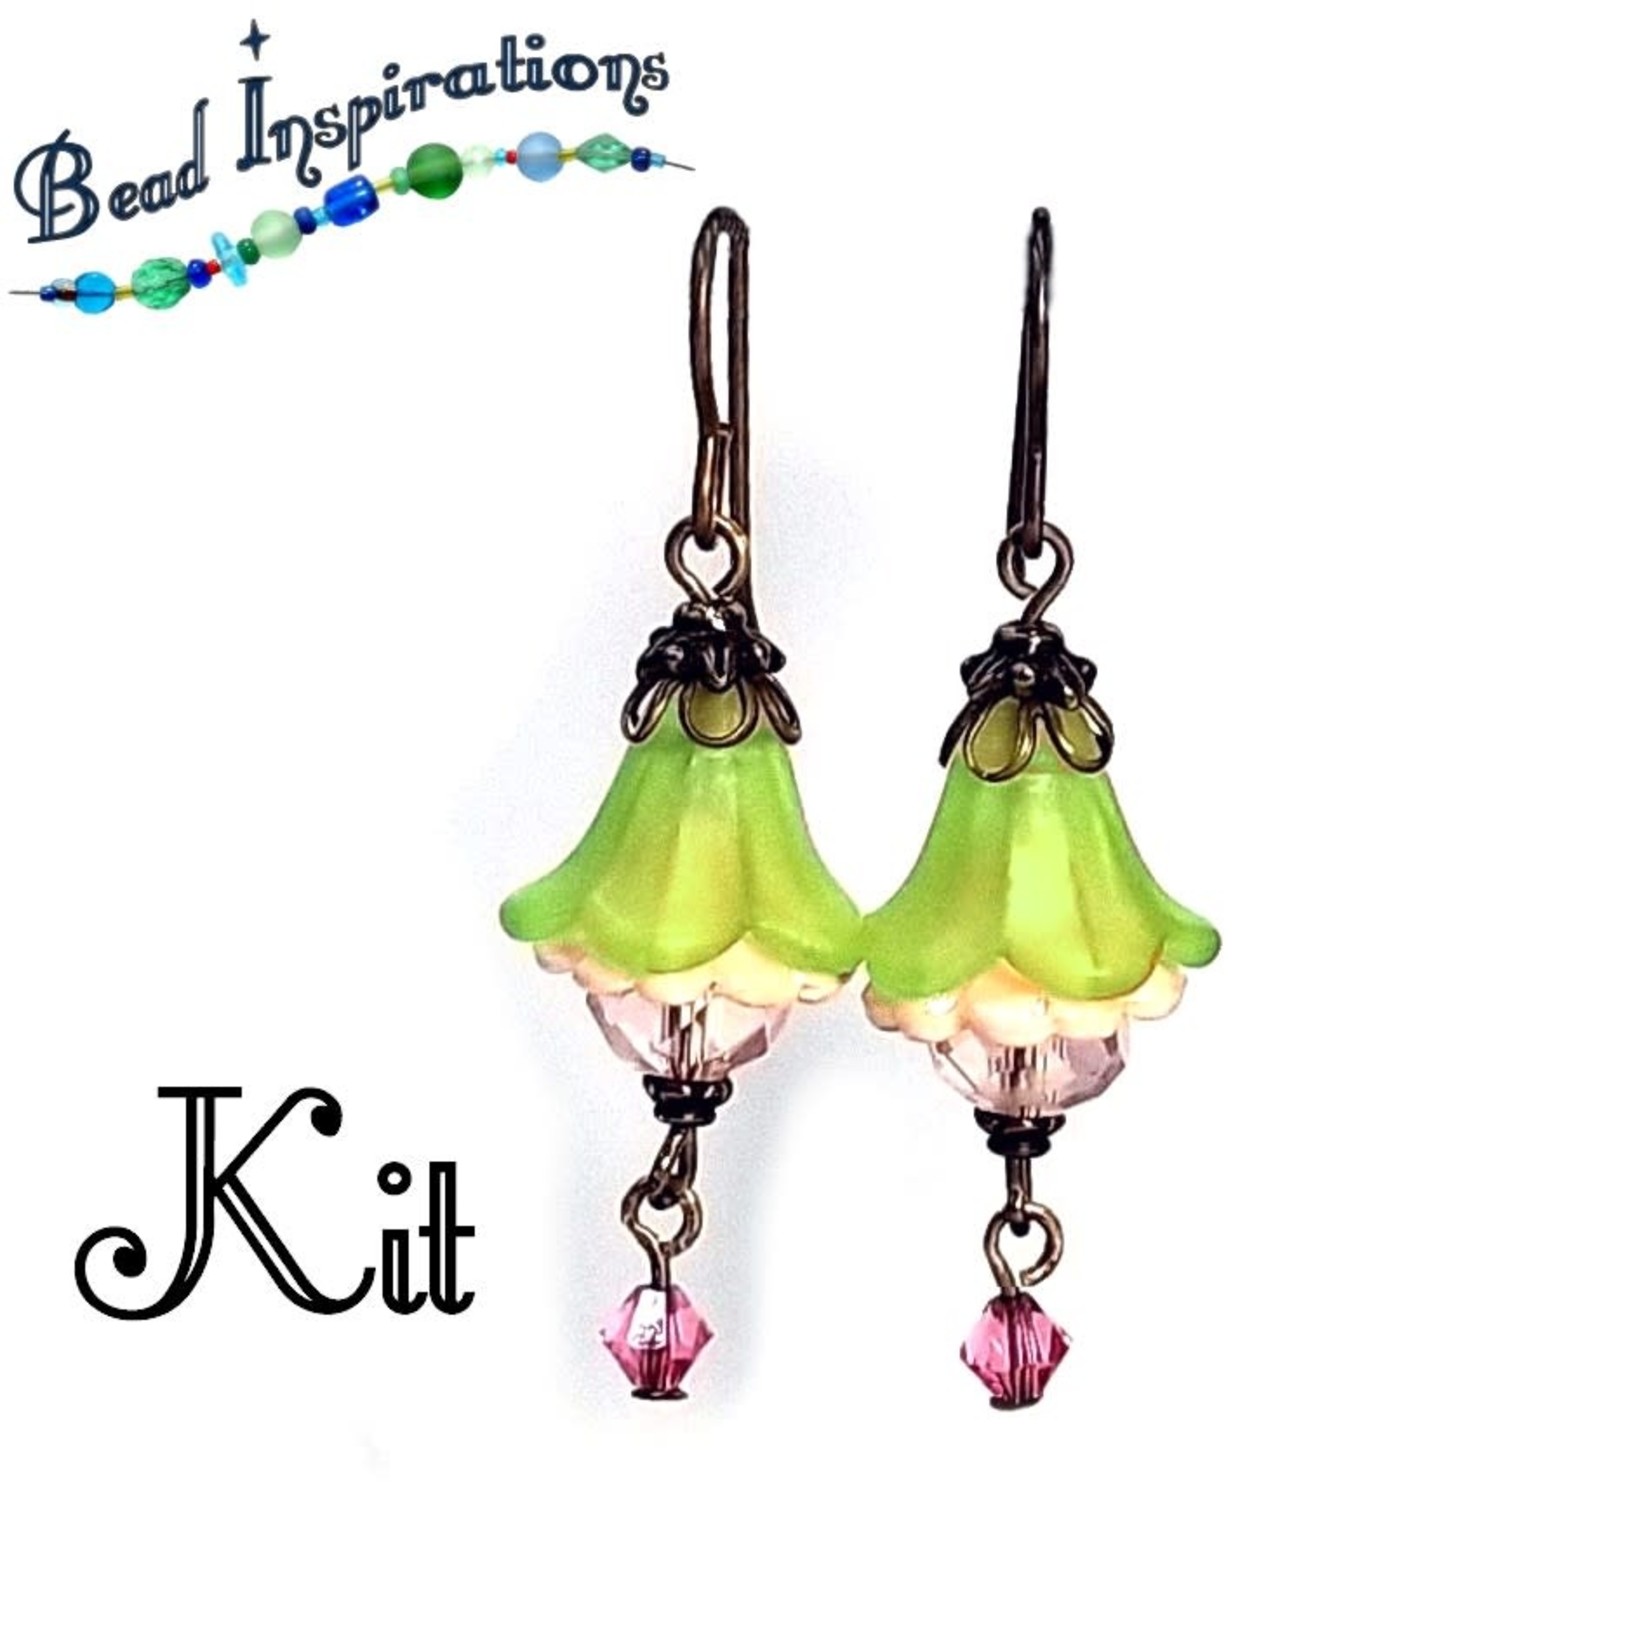 Bead Inspirations Lucy Spring Earring Kit